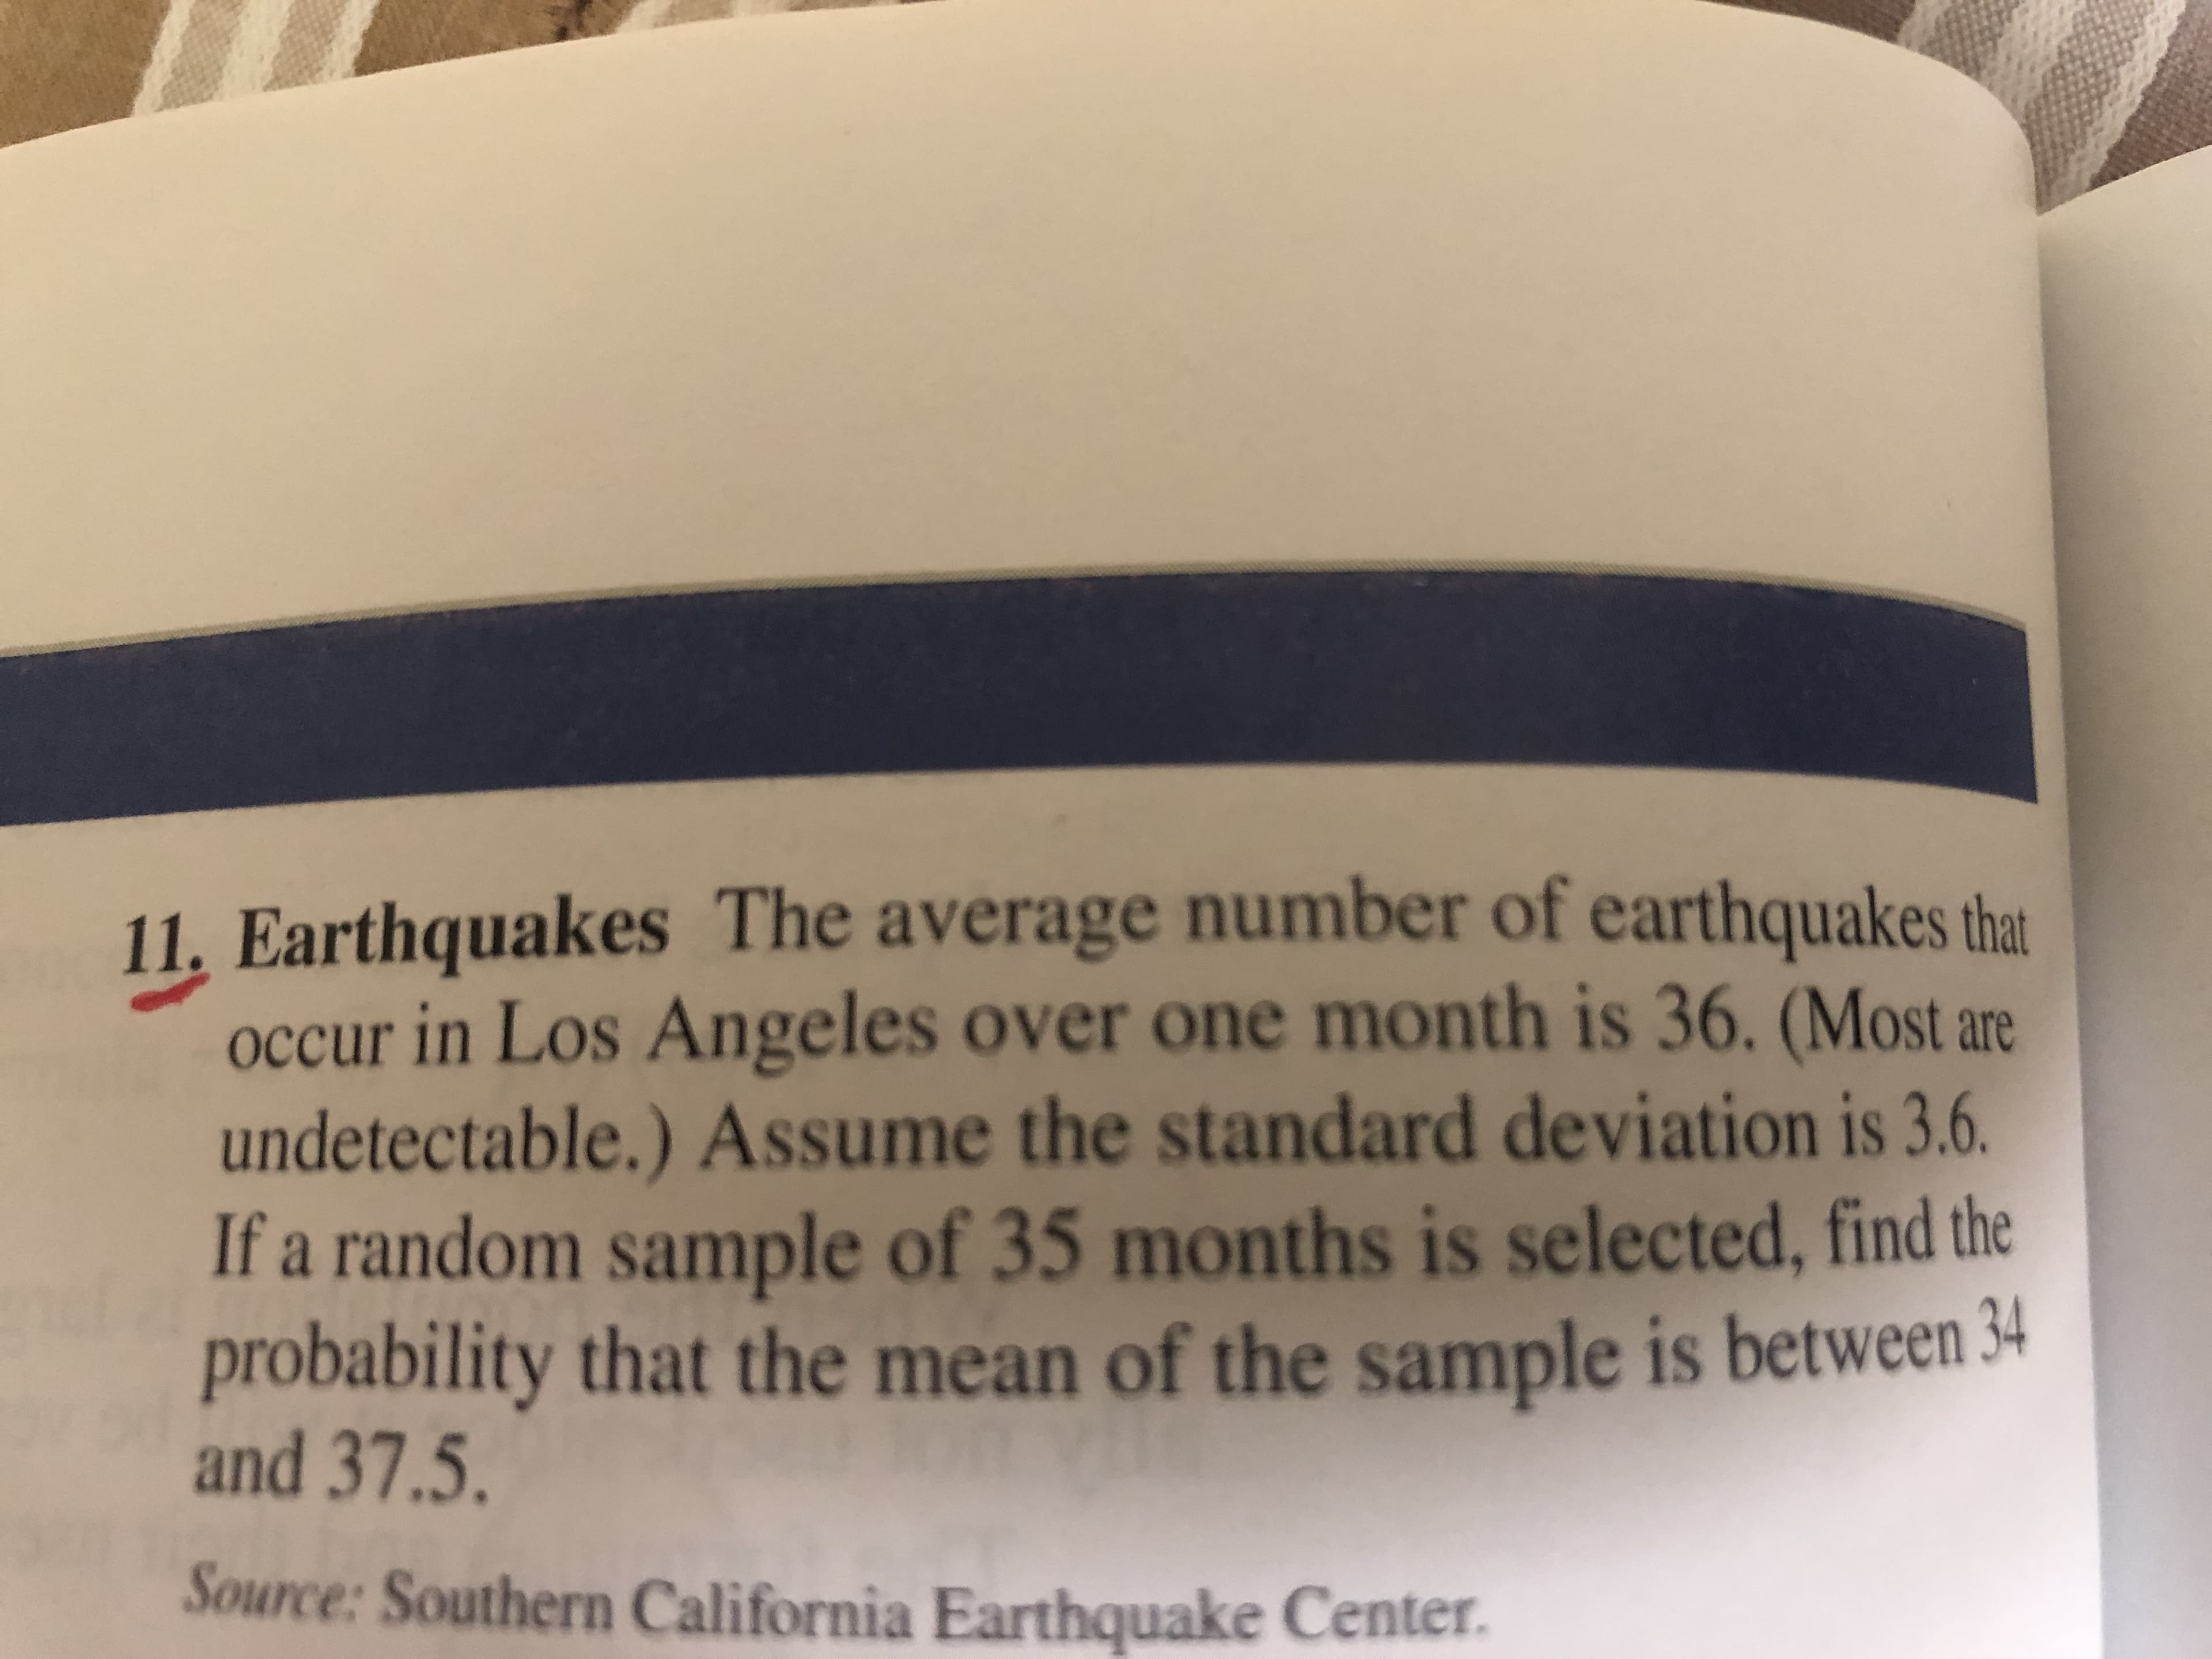 . Earthquakes The average number of earthquakes the
occur in Los Angeles over one month is 36. (Most are
undetectable.) Assume the standard deviation is 3.6.
If a random sample of 35 months is selected, find the
probability that the mean of the sample is between 34
and 37.5.
